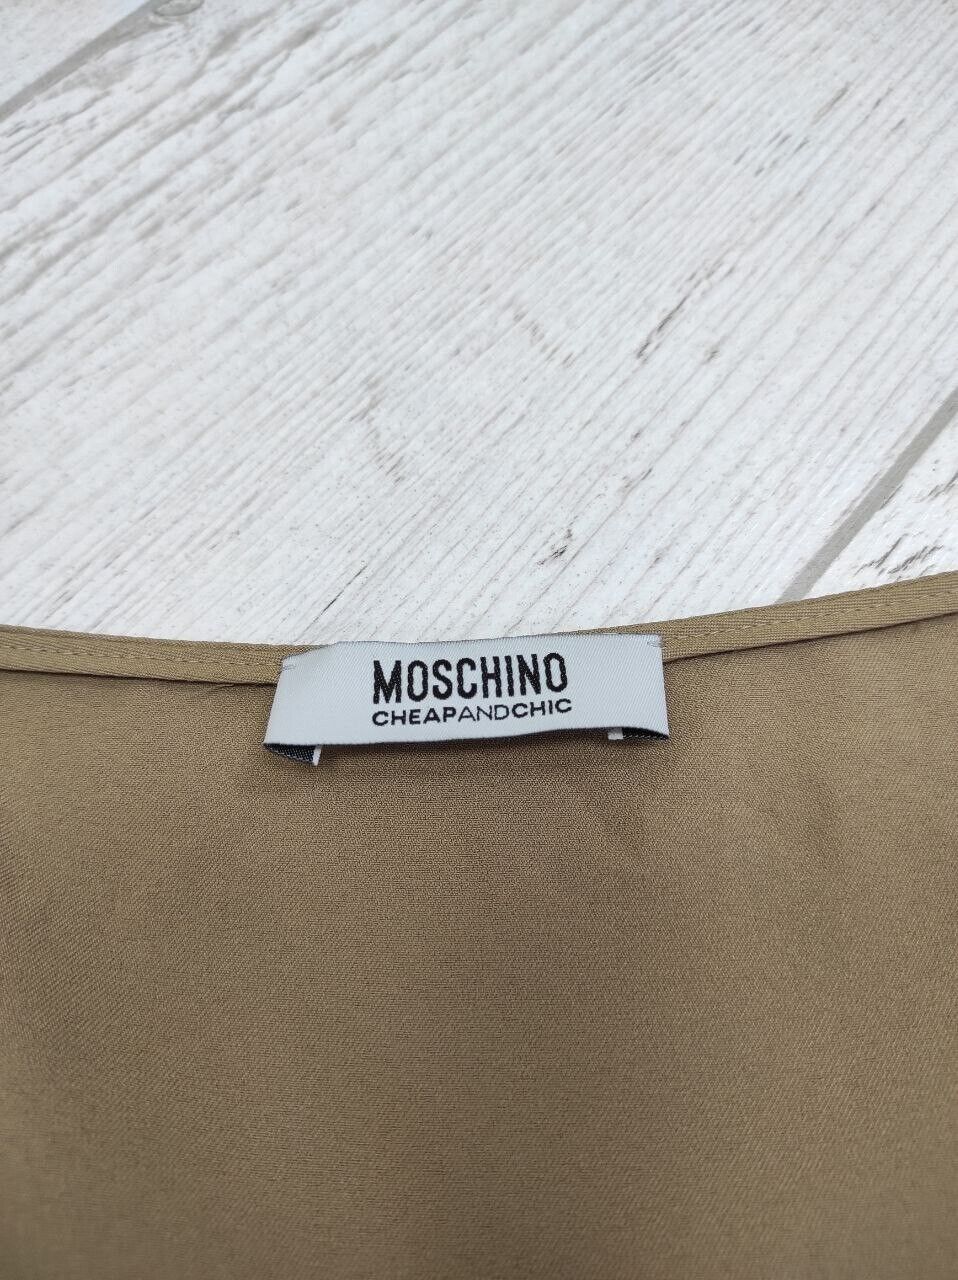 Moschino Cheap And Chic Vintage Rare Iconic Dress… - image 7